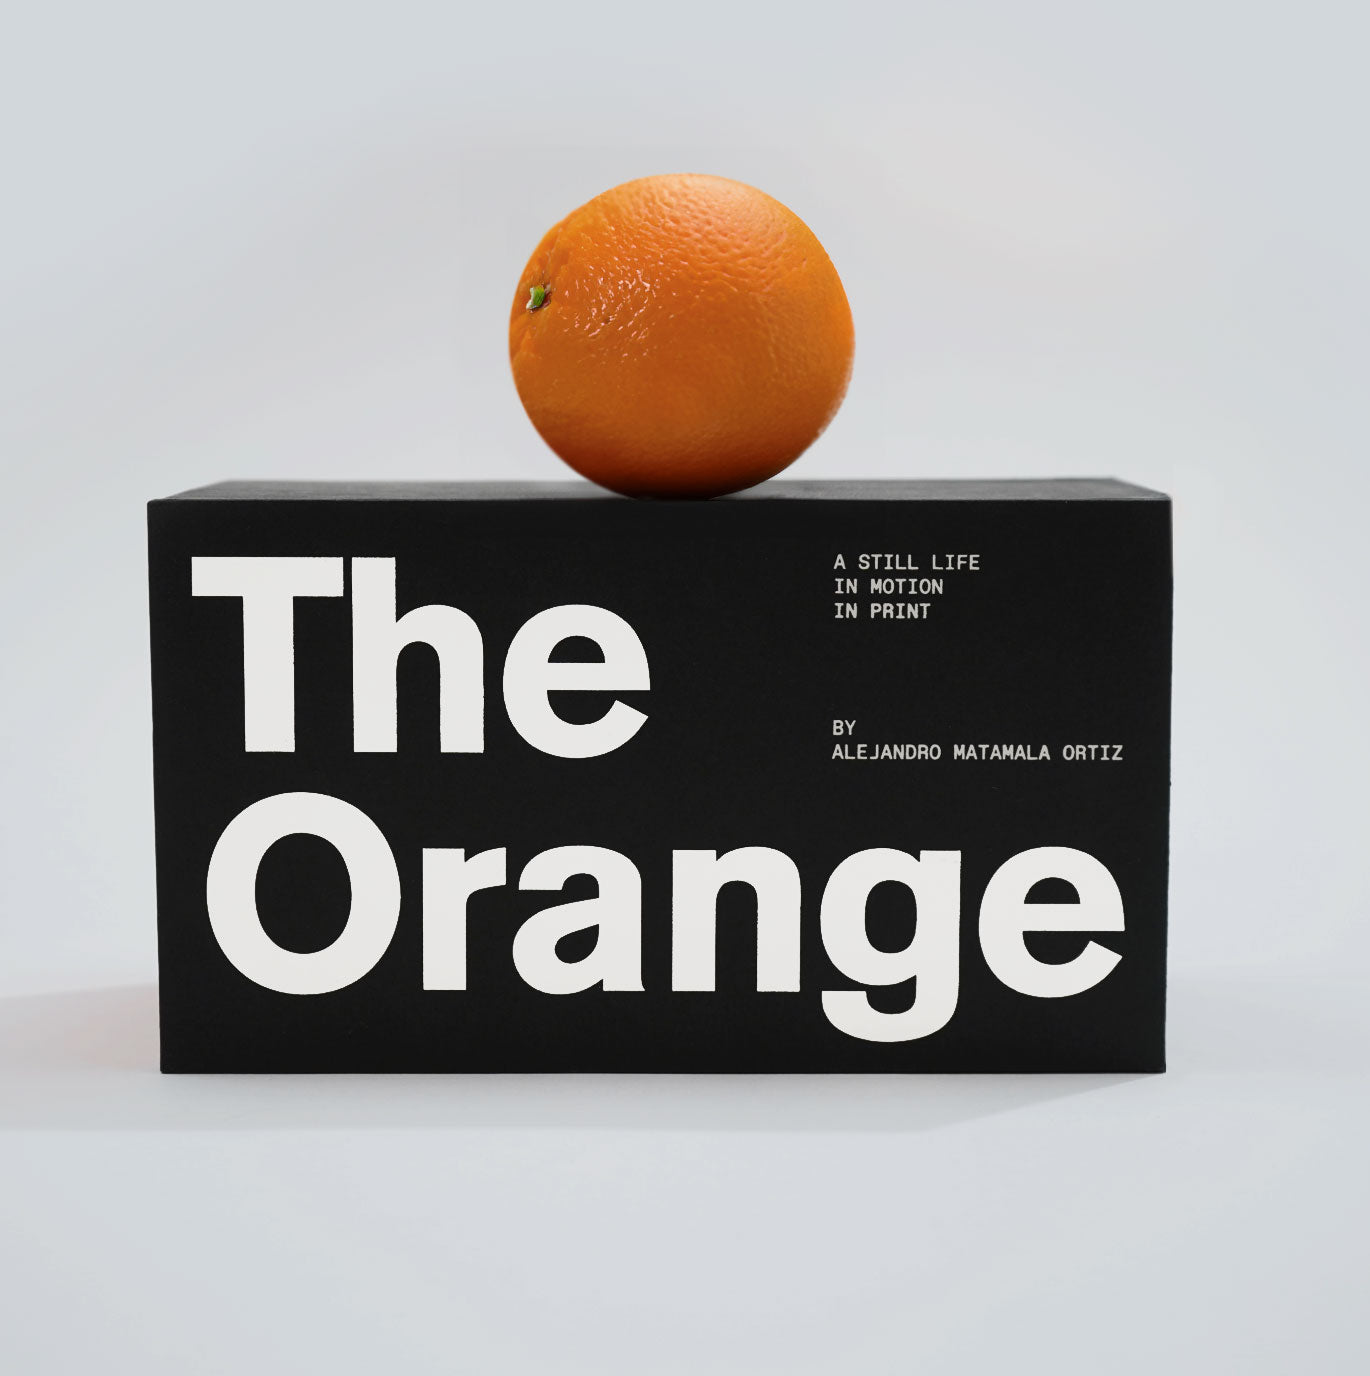 The Orange: A Still Life in Motion in Print